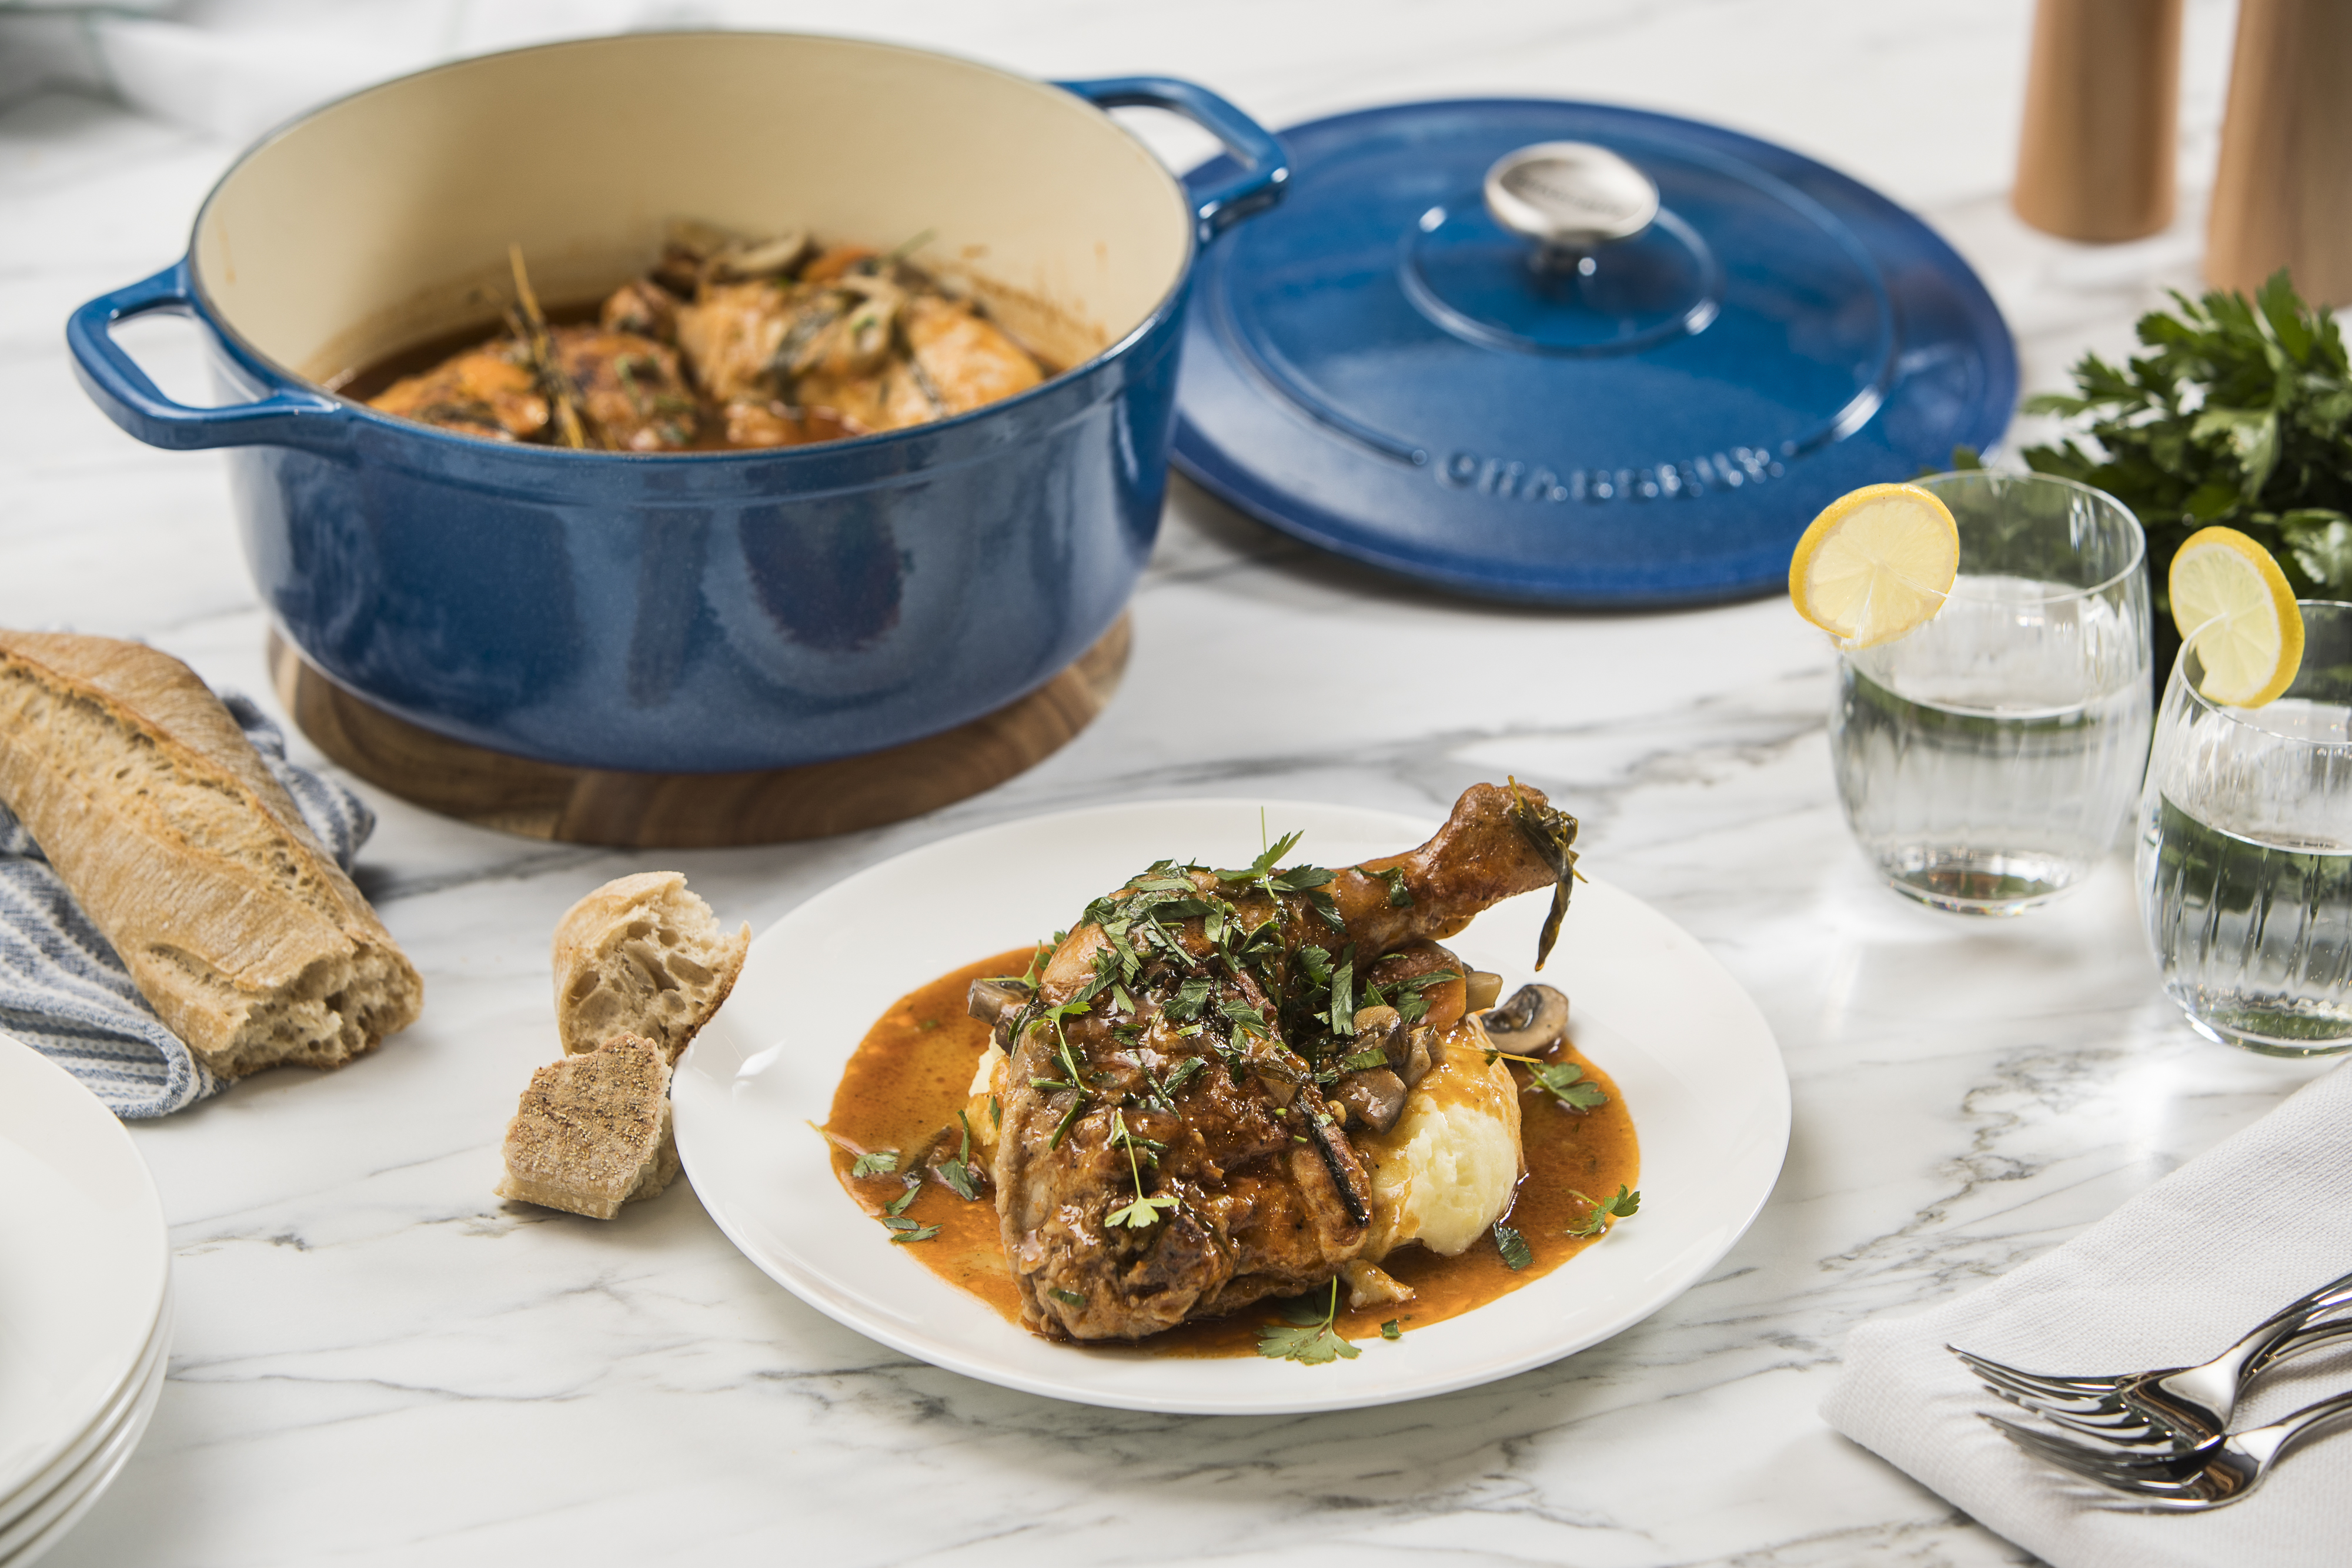 Chicken chasseur-preparation by Jeff Simonetta in Chasseur Anniversary Edition French Oven